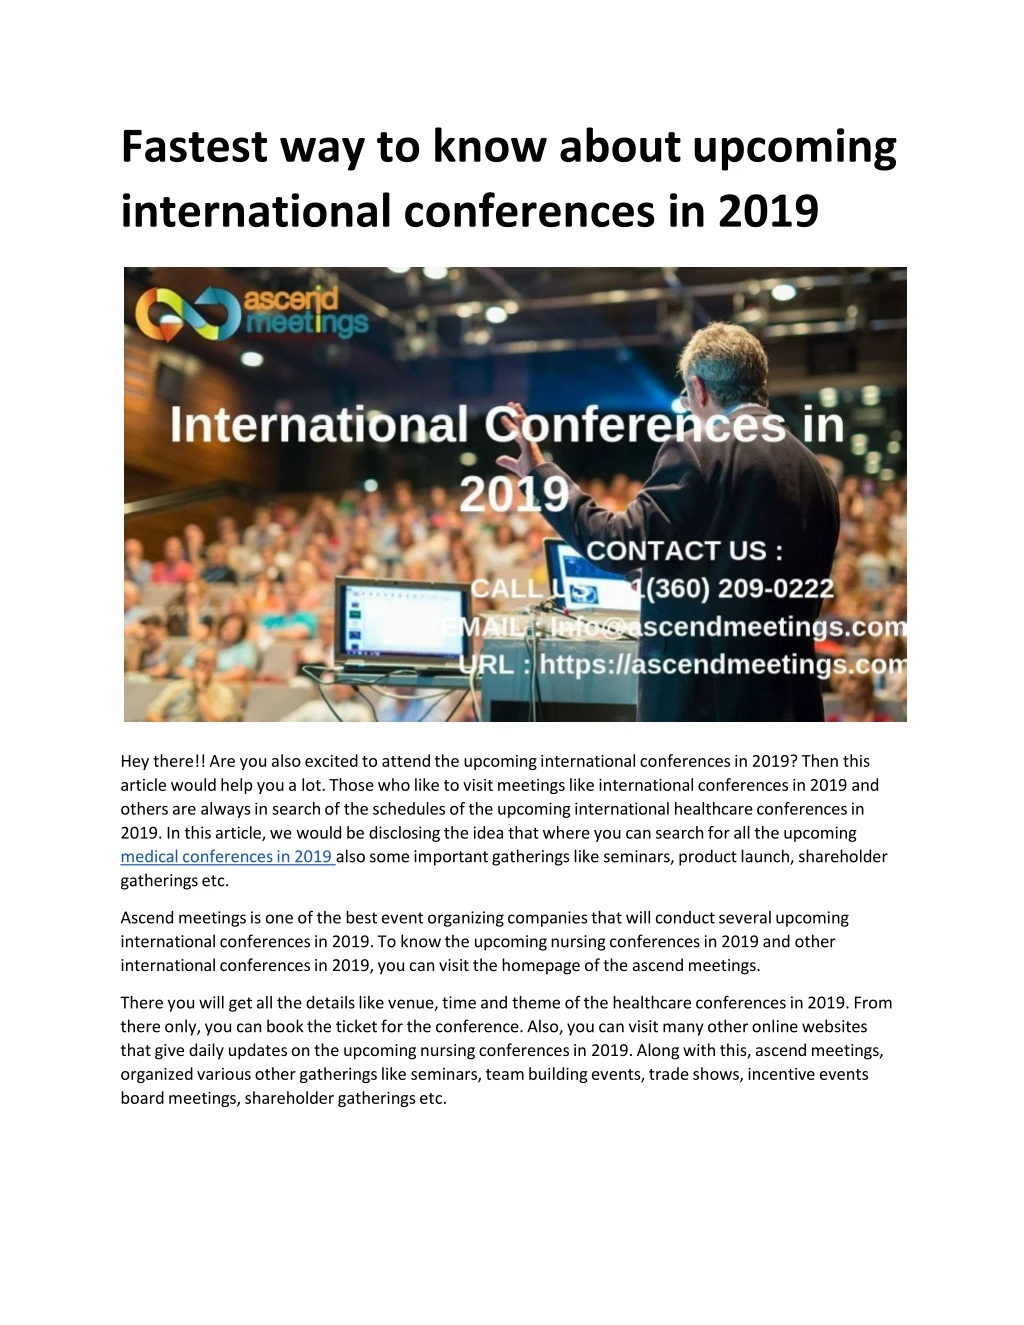 fastest way to know about upcoming international conferences in 2019